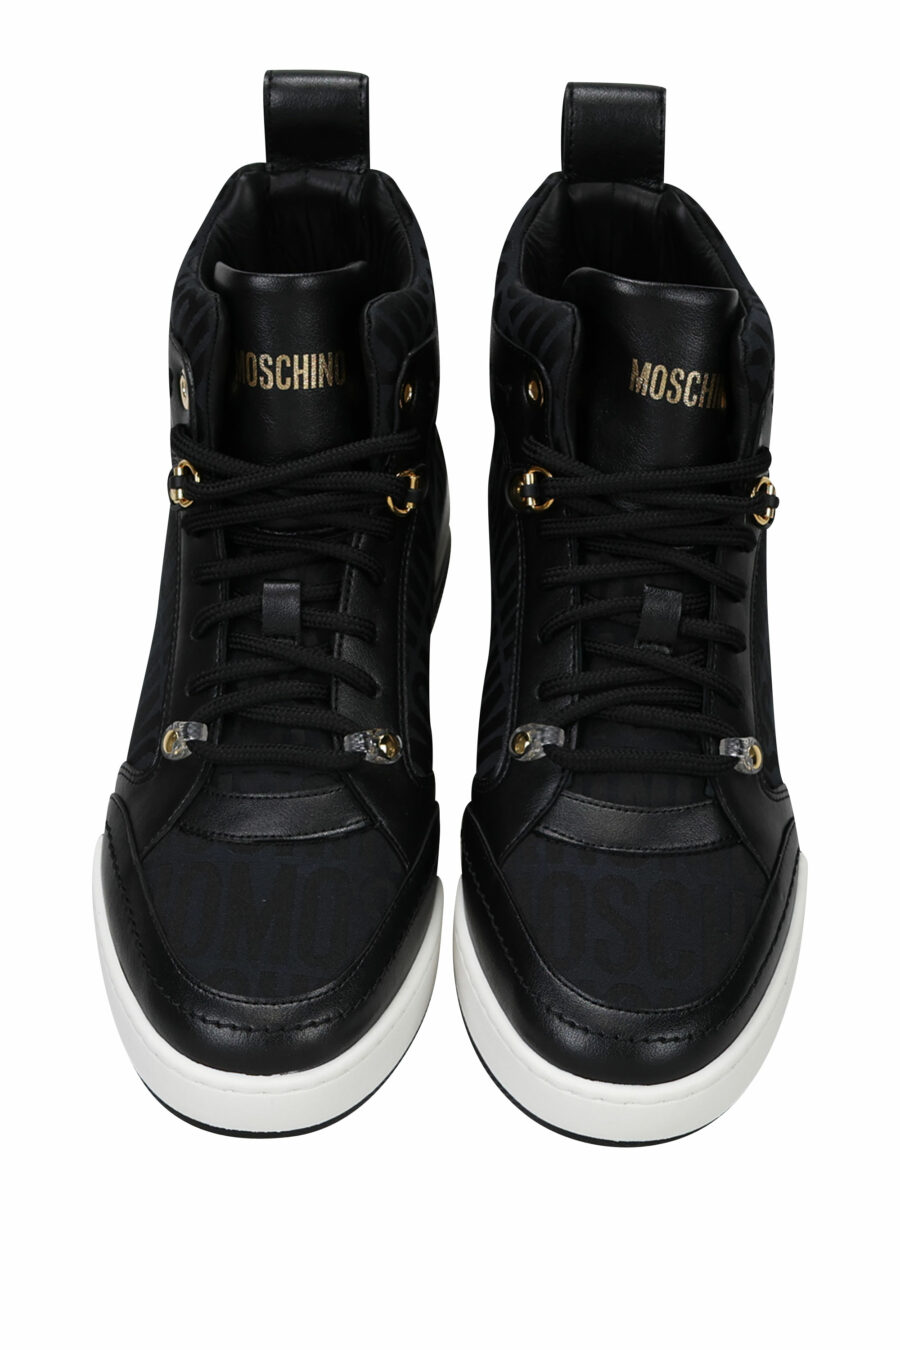 Black "all over logo" high top trainers with white sole - 8054653825758 4